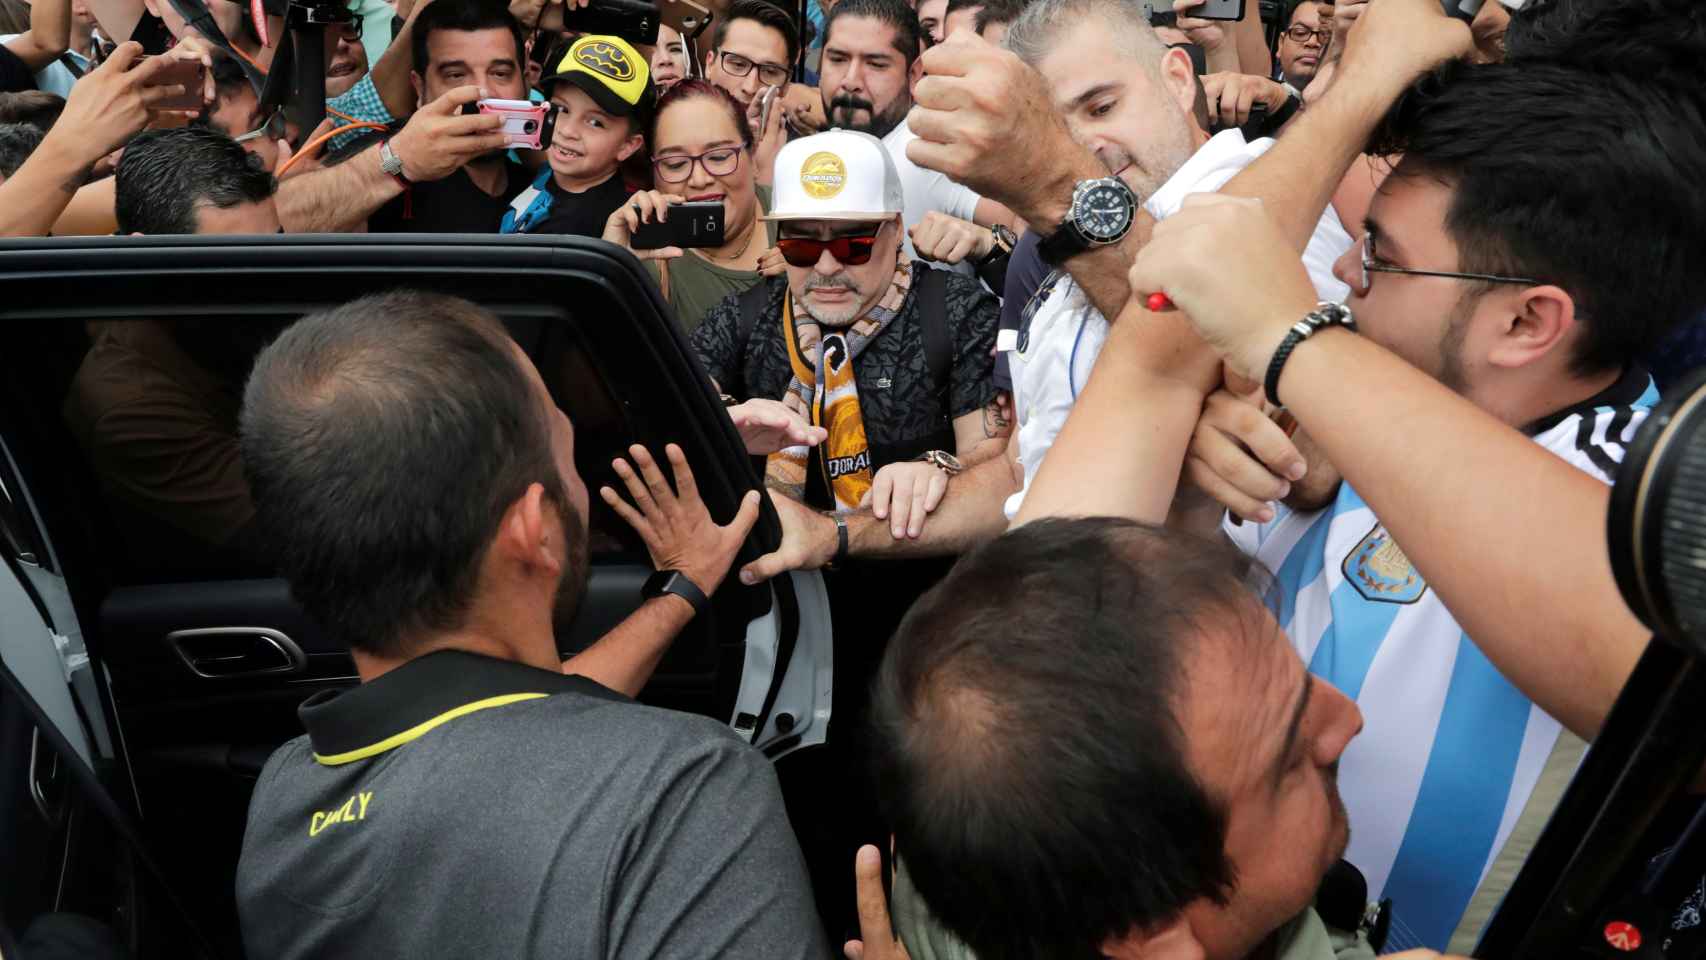 Argentine soccer legend Diego Maradona who was named head coach of Mexican second division team Dorados arrives at the airport in Culiacan